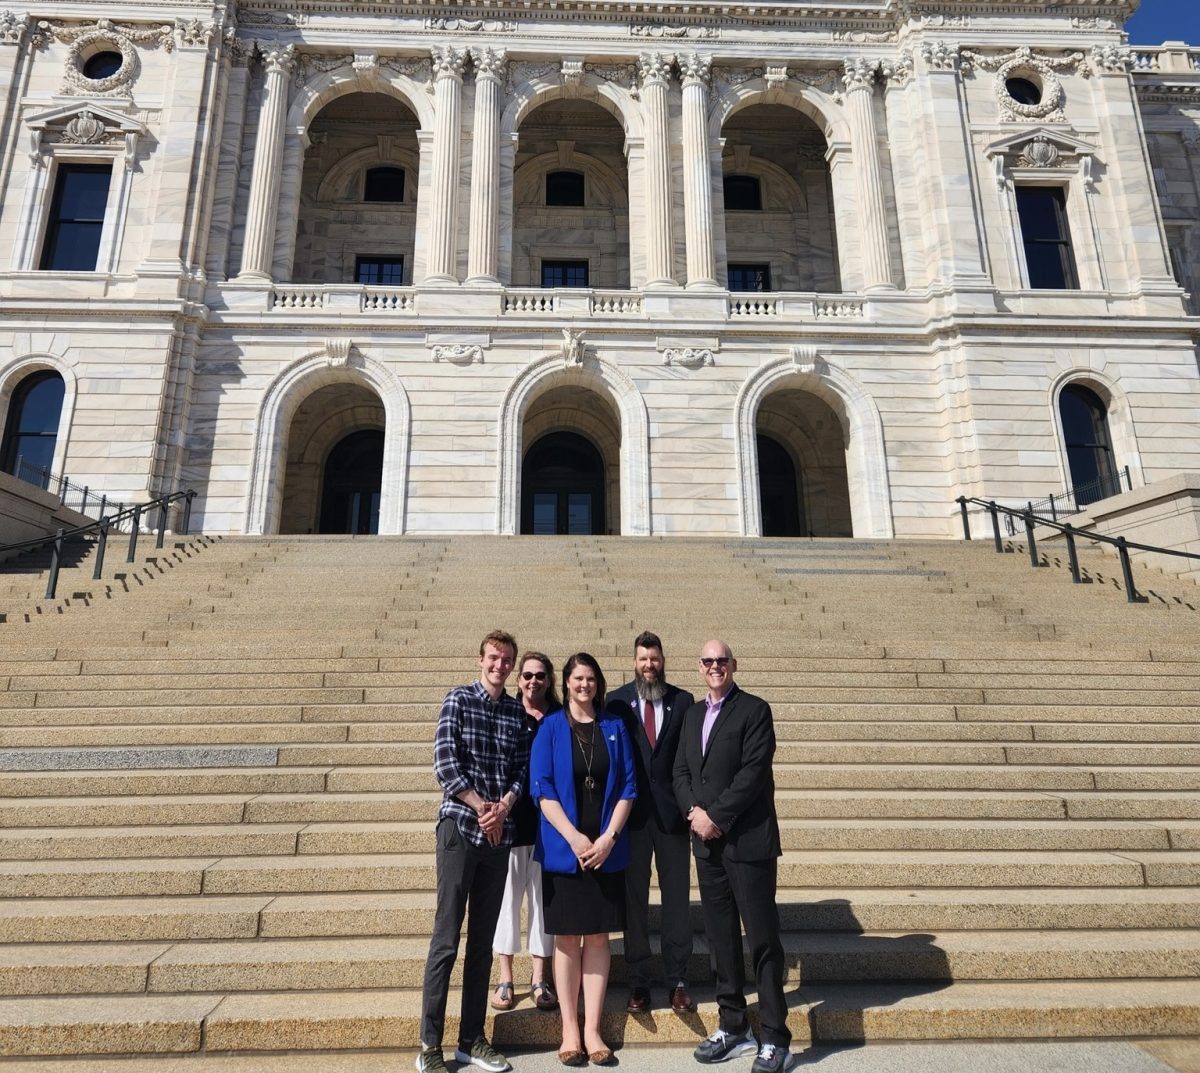 Members+of+the+American+Foundation+for+Suicide+Prevention+on+State+Capitol+Day+in+Minnesota.+April+9+is+State+Capitol+Day%2C+a+day+to+advocate+for+new+legislation+surrounding+mental+health.